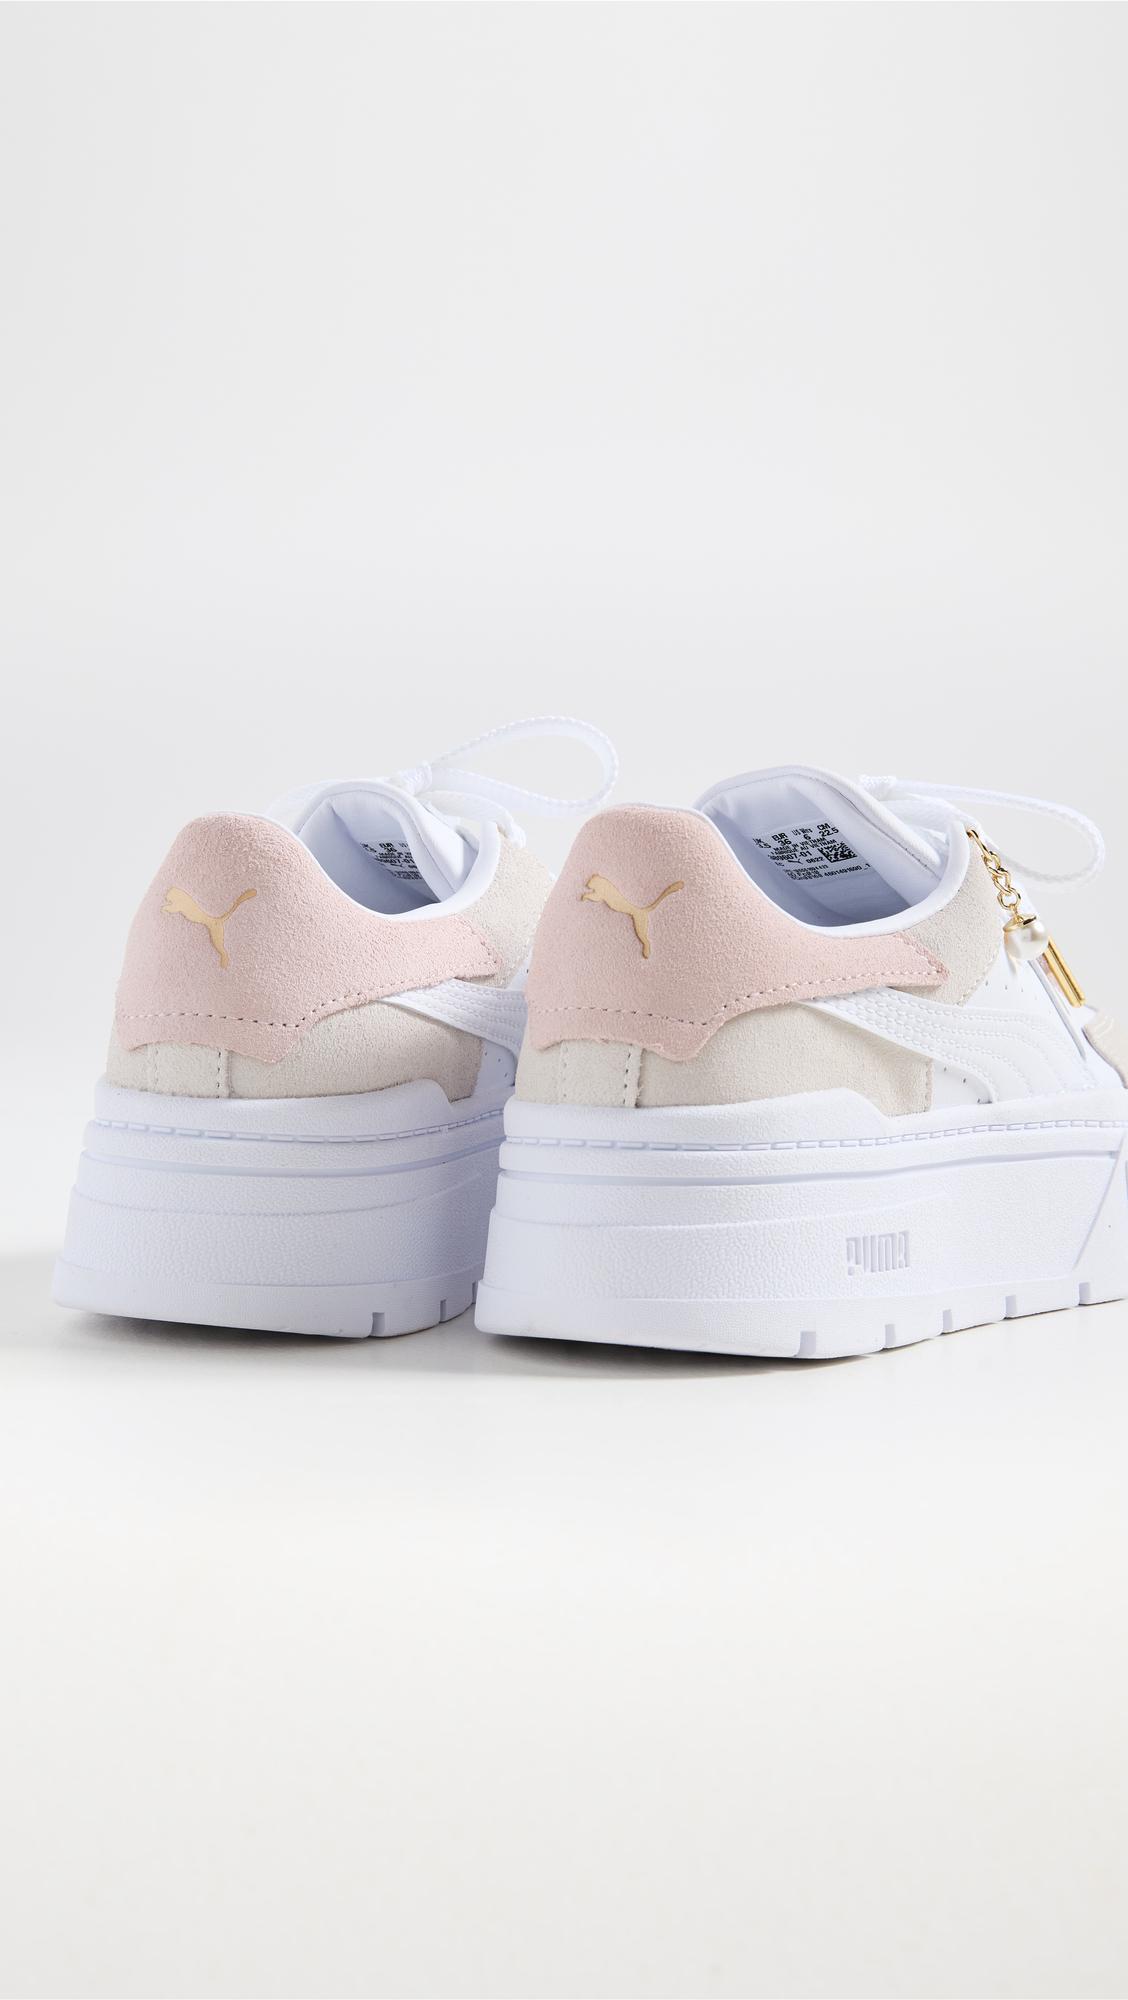 PUMA Mayze Stack Edgy Pearl Sneakers in White | Lyst